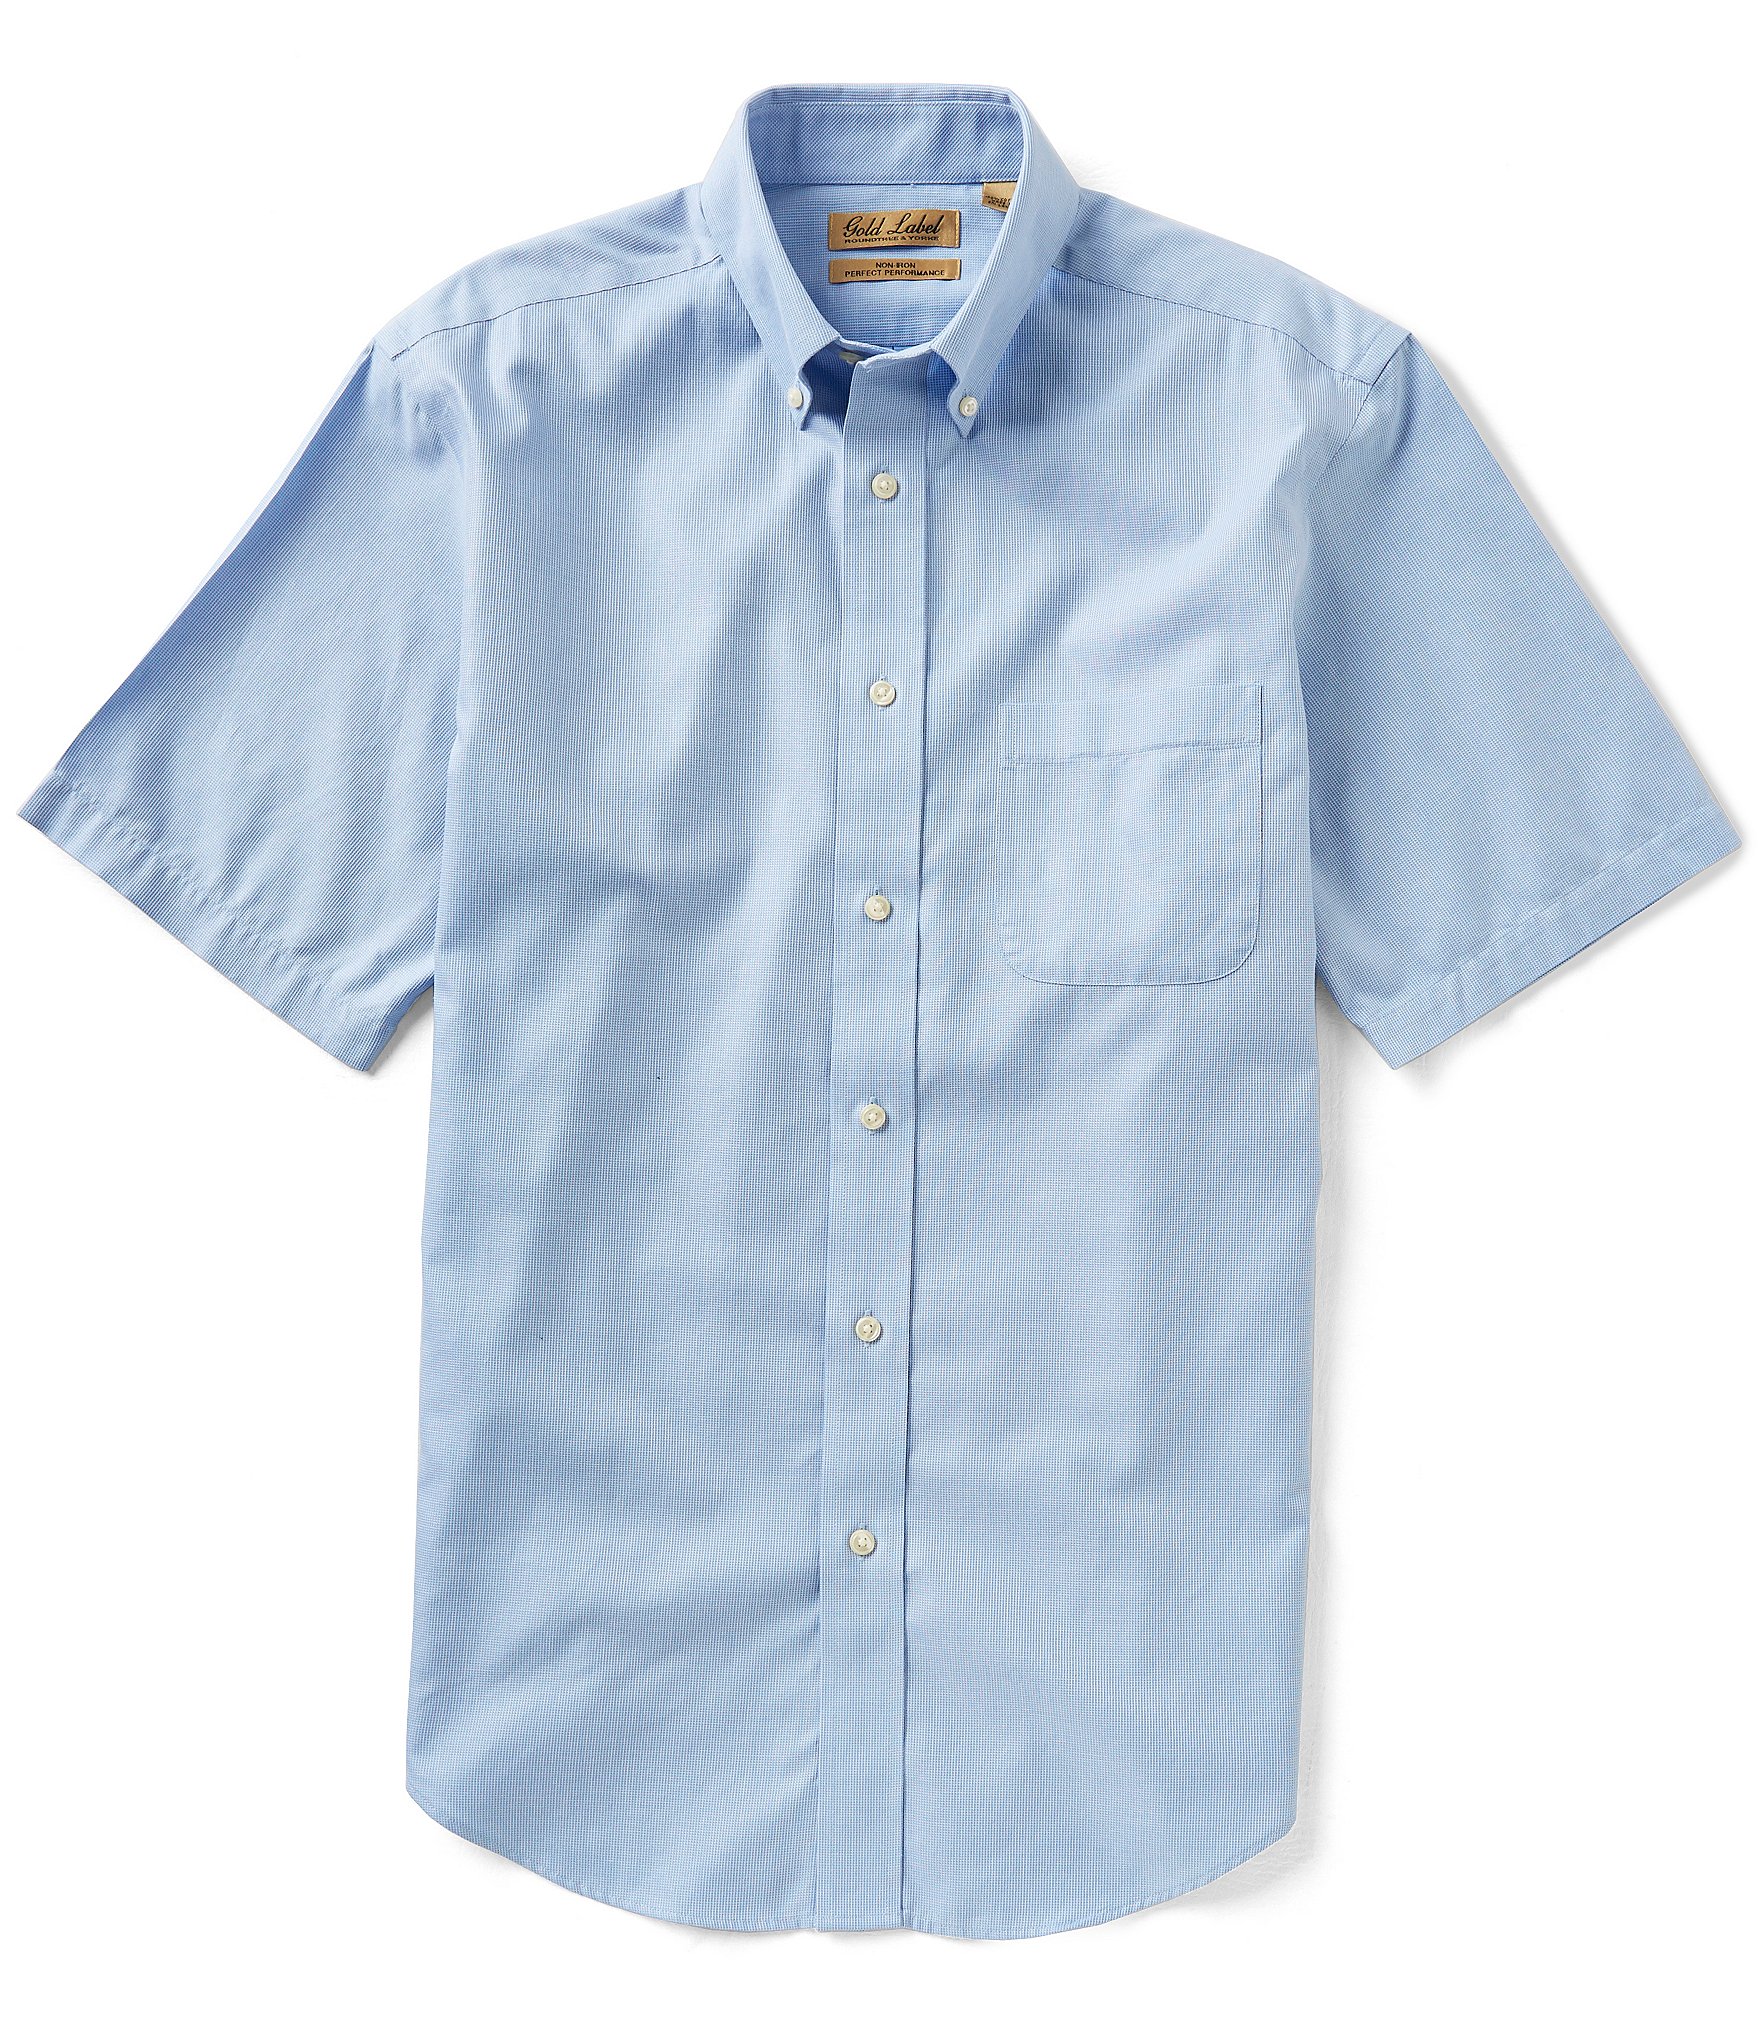 Gold Label Roundtree & Yorke Short-Sleeve Solid Button-down Collar ...